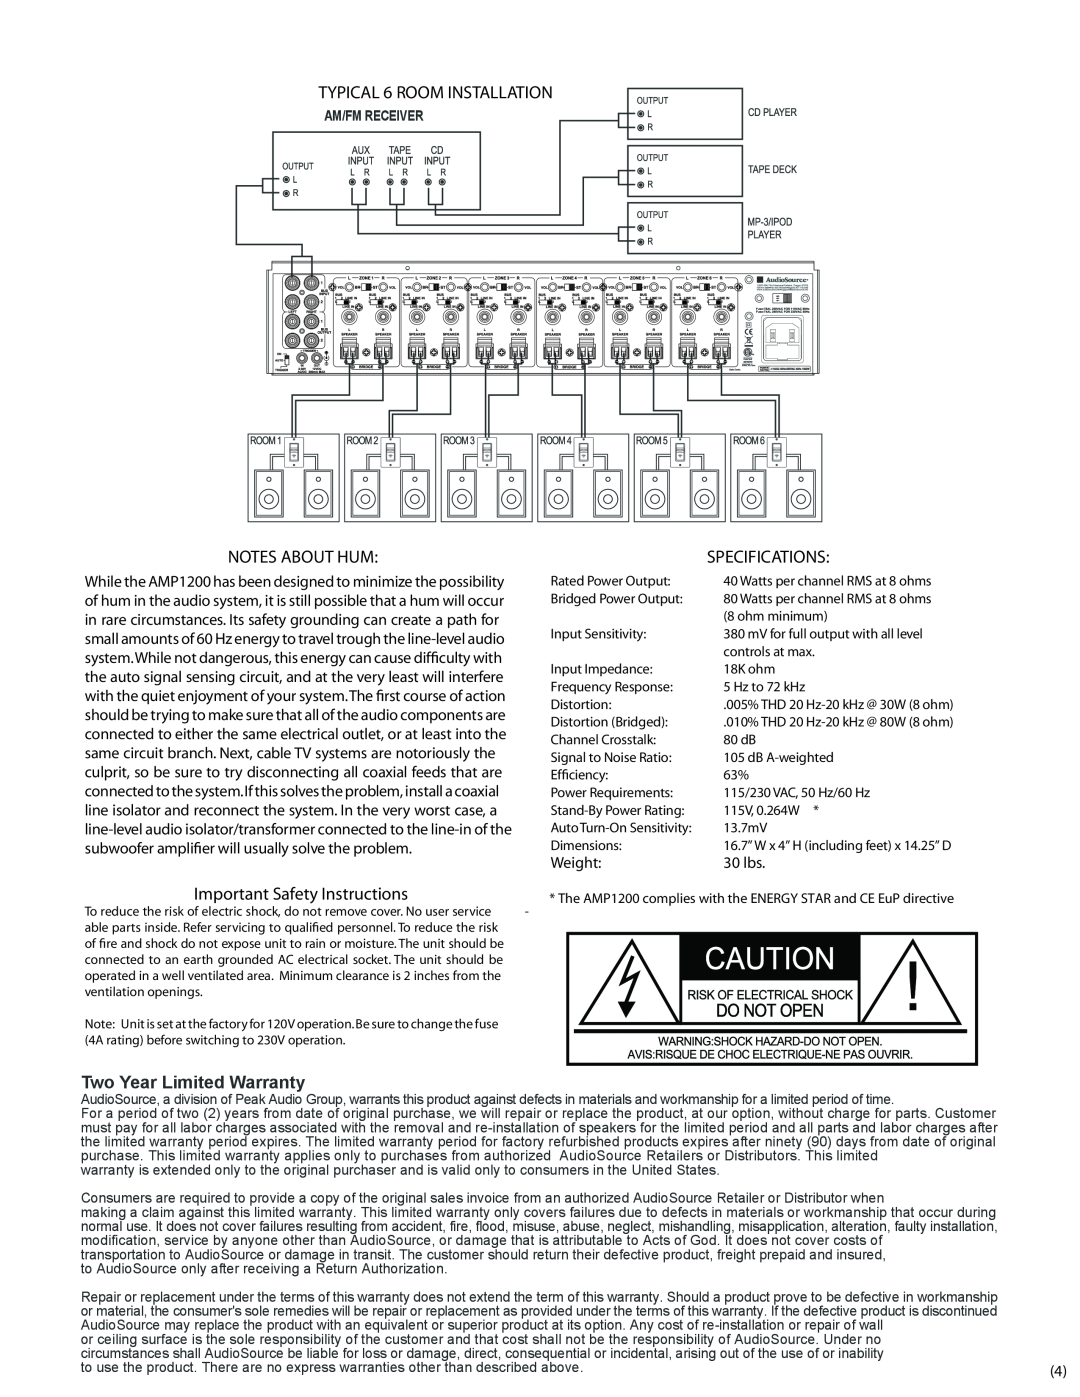 AudioSource AMP1200 TYPICAL 6 ROOM INSTALLATION, Notes About Hum, Important Safety Instructions, Specifications, Weight 